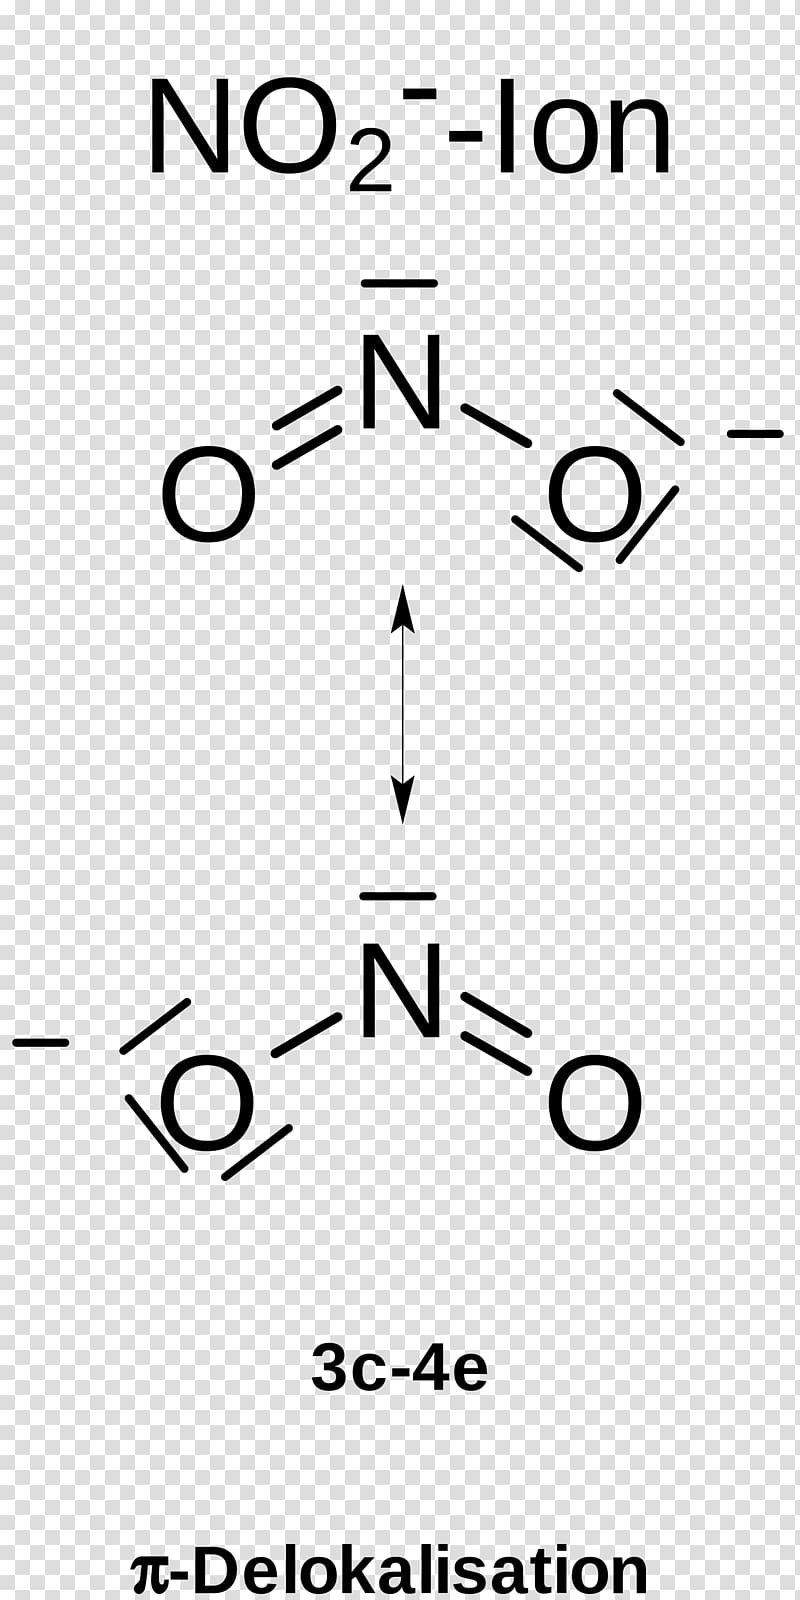 Ionic bonding Nitrite Three-center two-electron bond Covalent bond, others transparent background PNG clipart